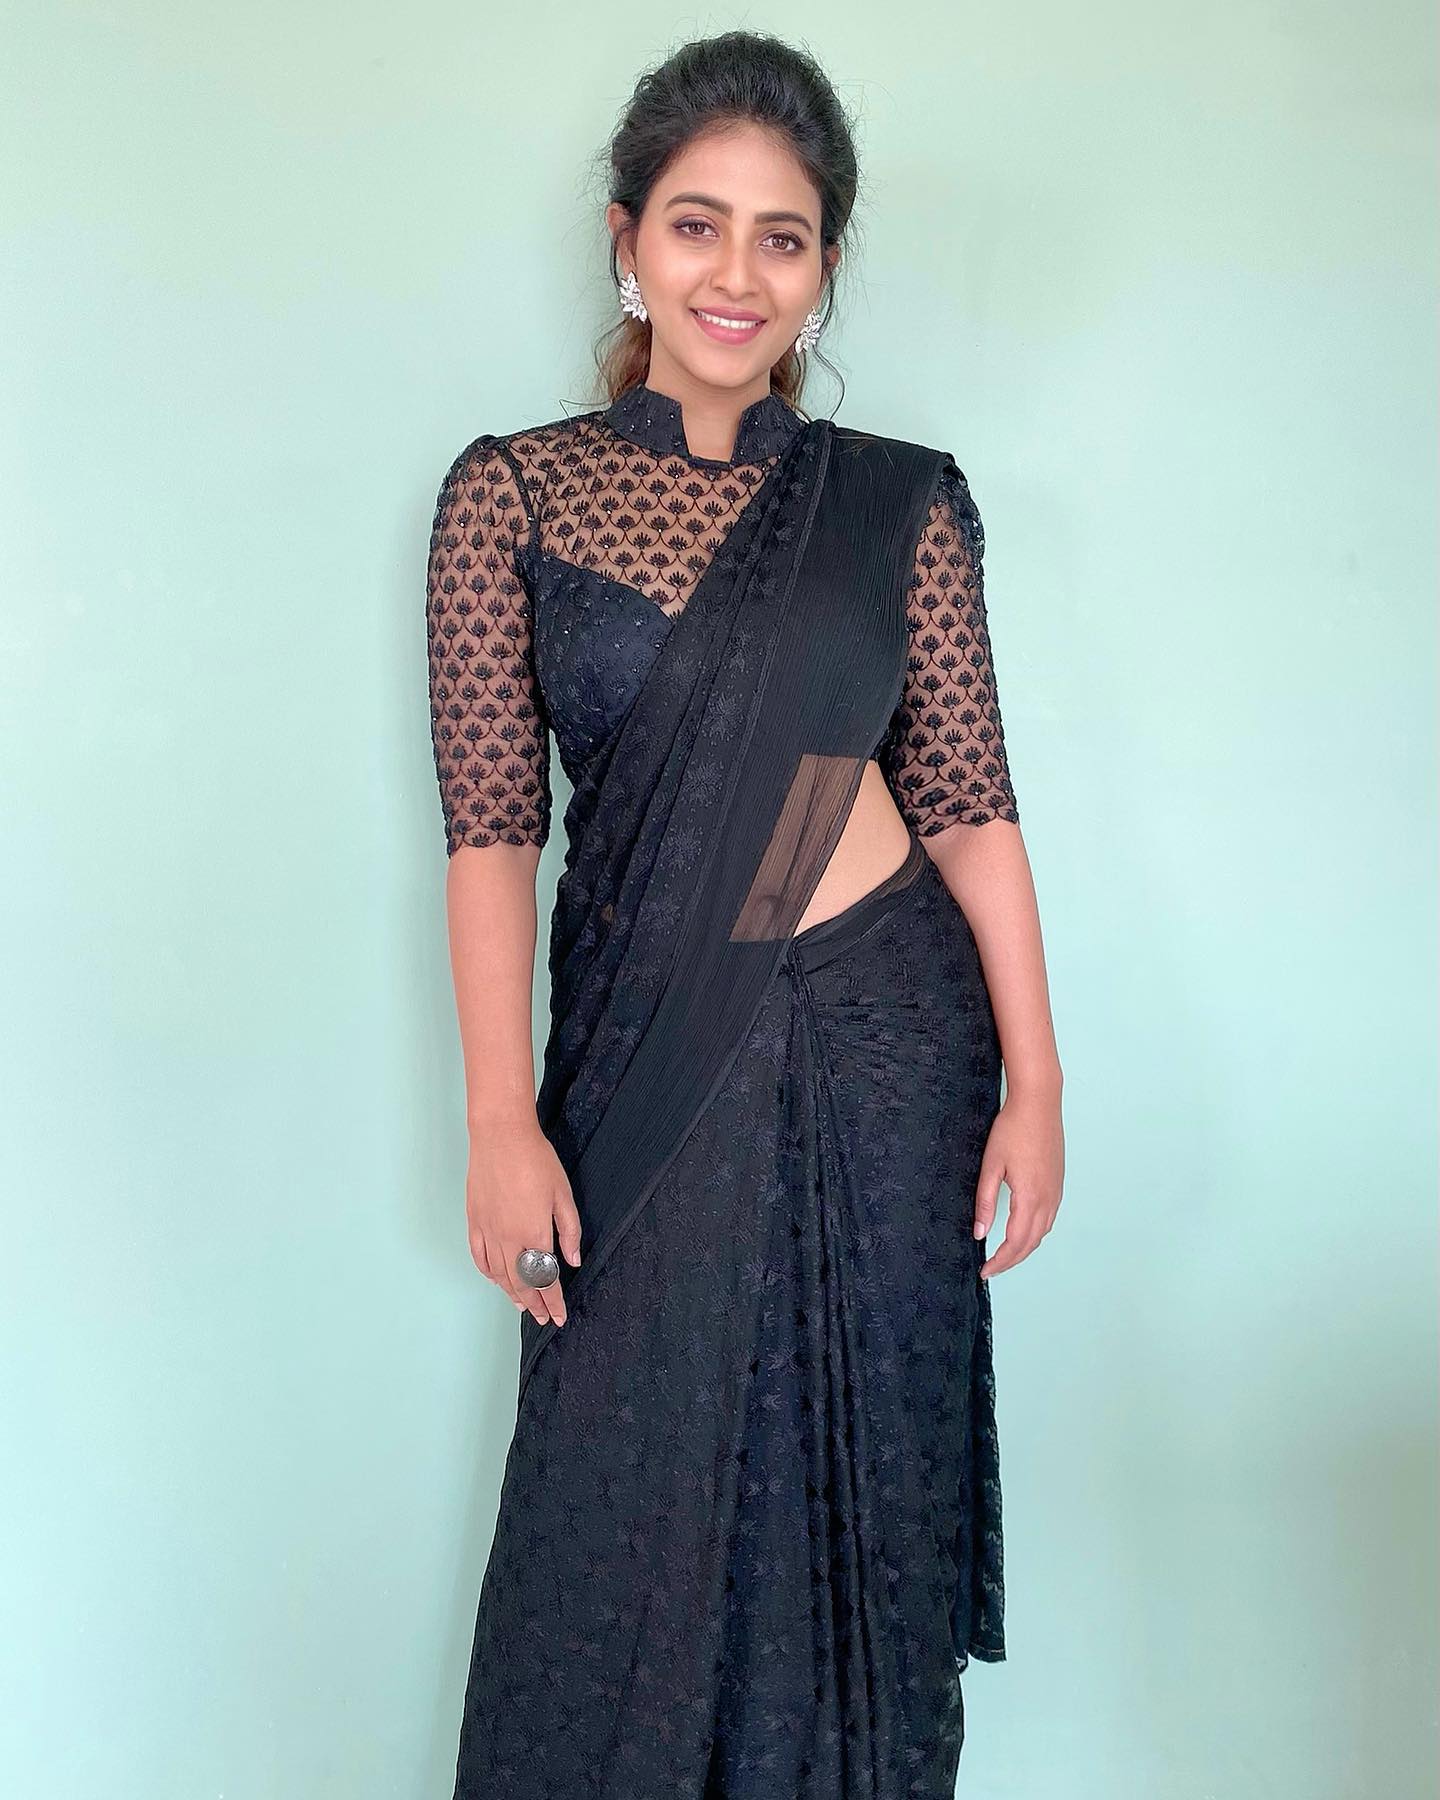 Beautiful Anjali In Black Embroidered Saree With High Neck Lace Sweetheart Neckline Blouse